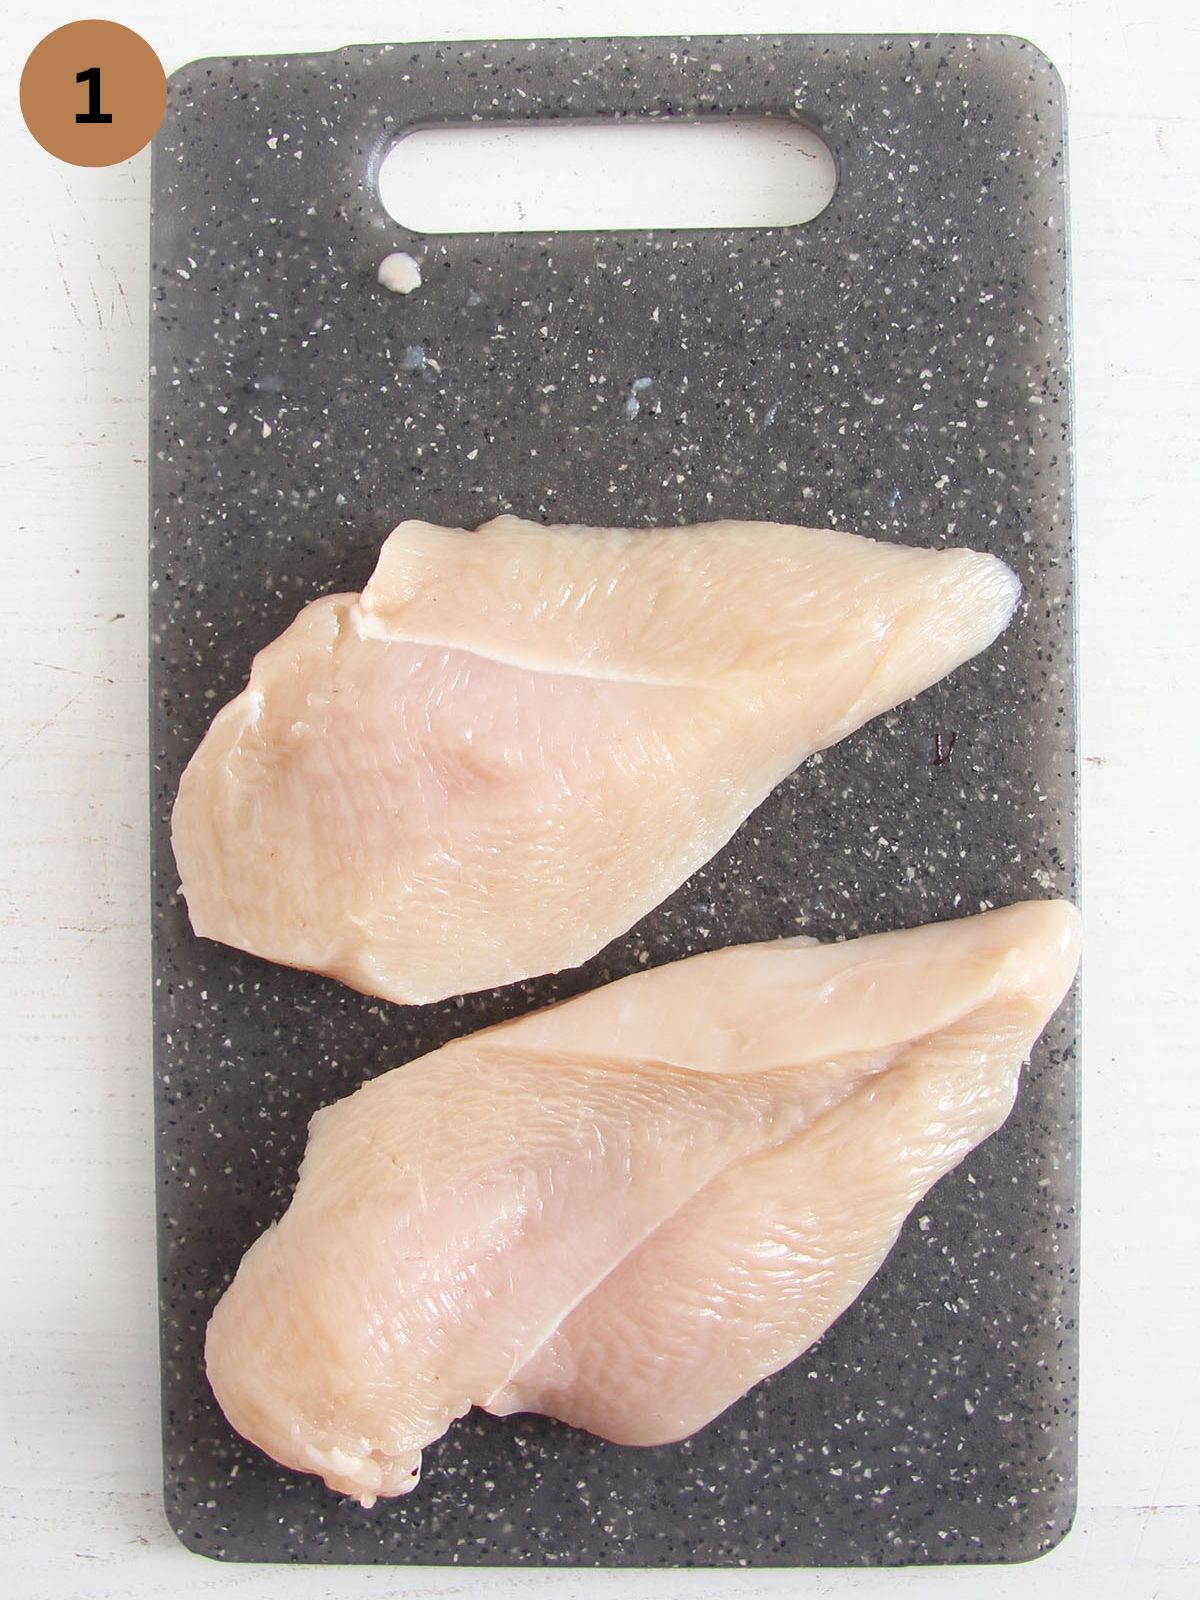 two raw chicken fillets on a gray cutting board.